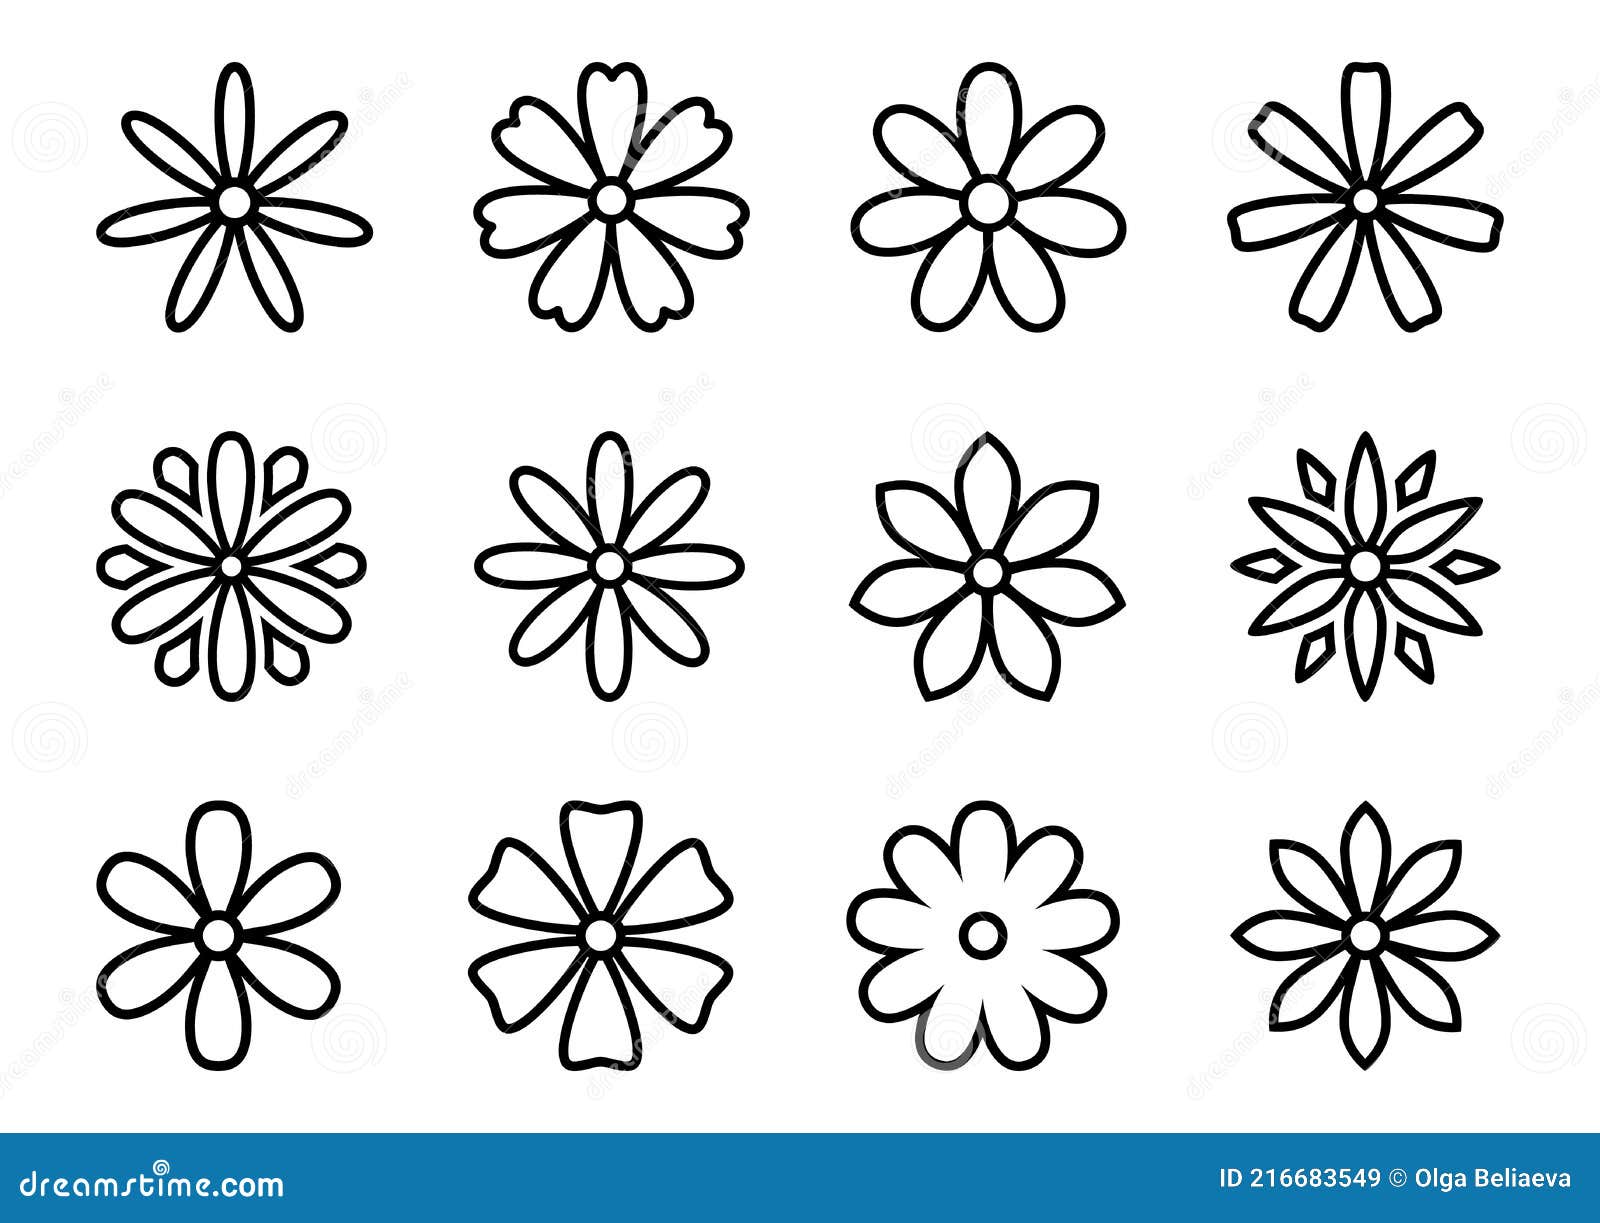 Vector Set with Black Silhouettes Daisy or Camomile Flowers ...